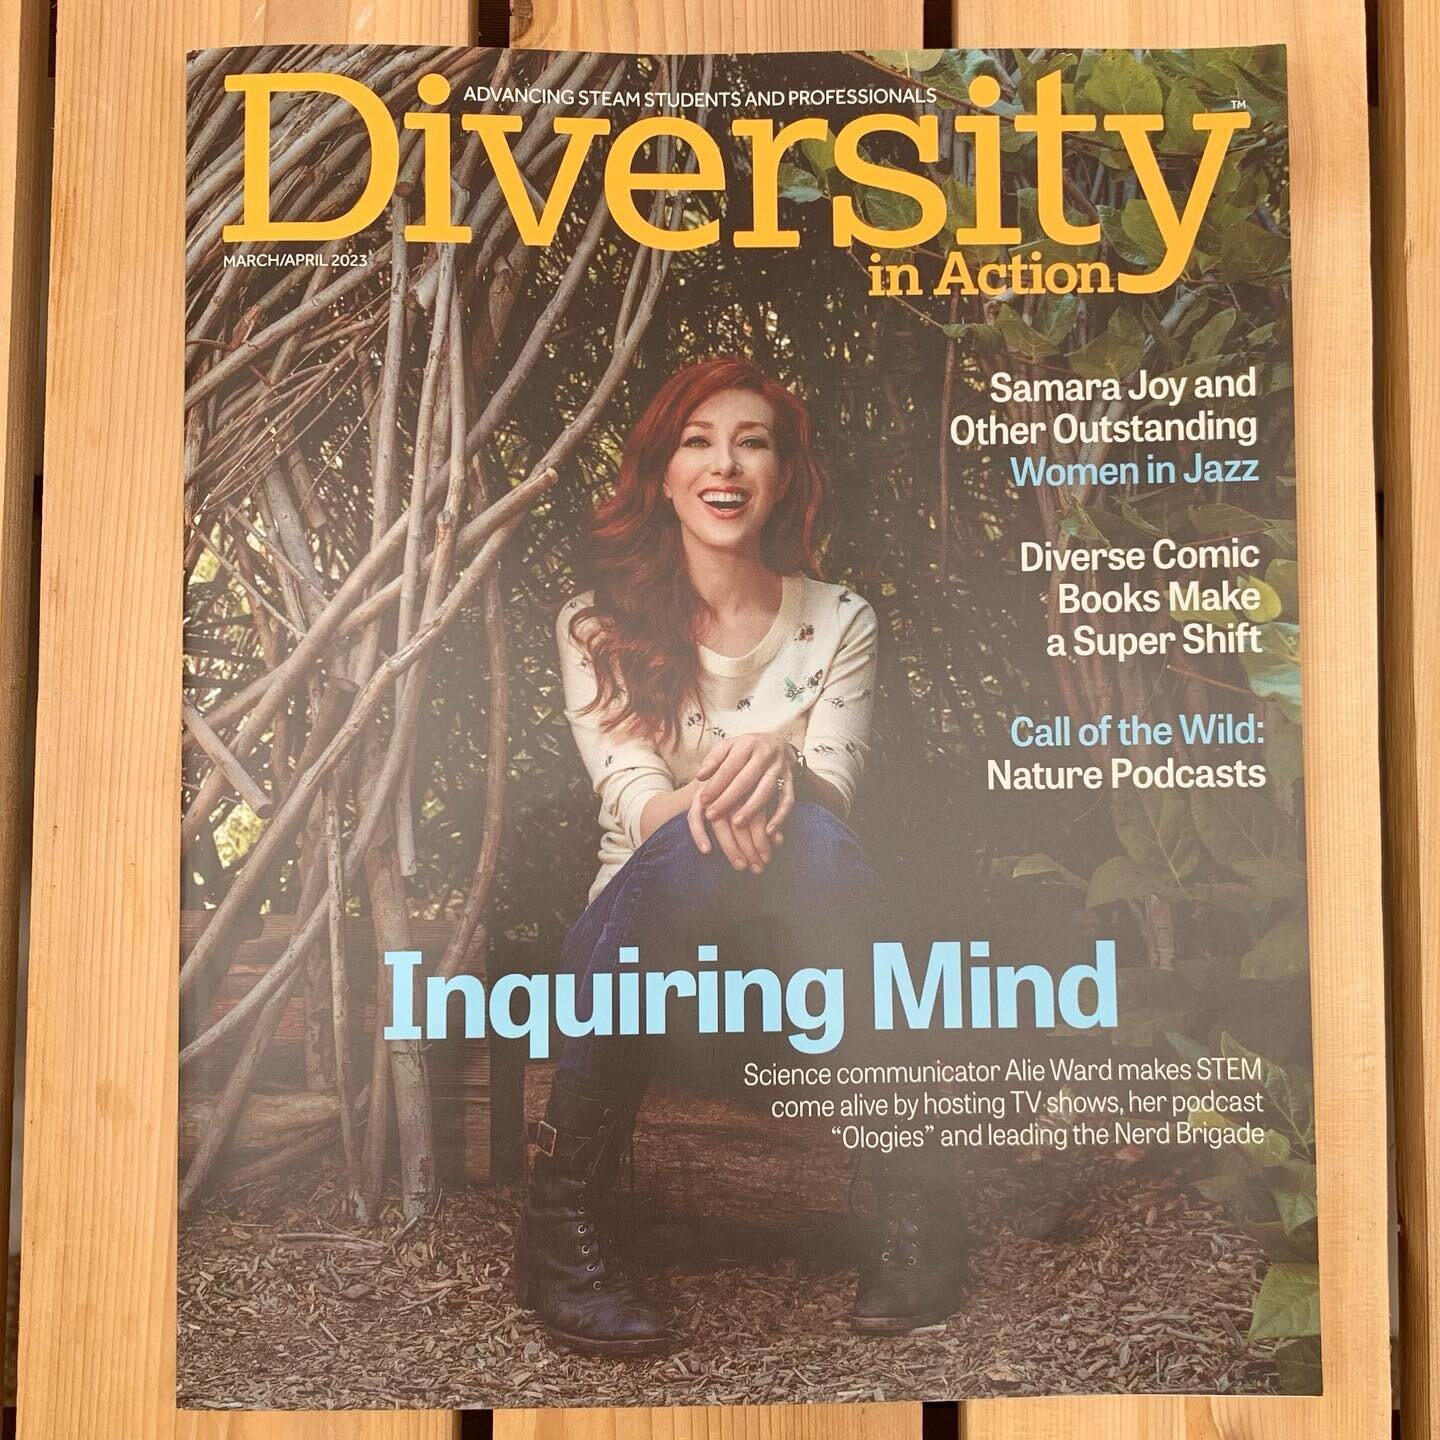 My first magazine cover, and I owe it all to @div_in_action. Thank you so much for profiling me and celebrating the array of geniuses I&rsquo;ve gotten to know for @Ologies, @cbsinnovationtv &amp; @cbsinventiontv. Truly surreal to hold this issue in 